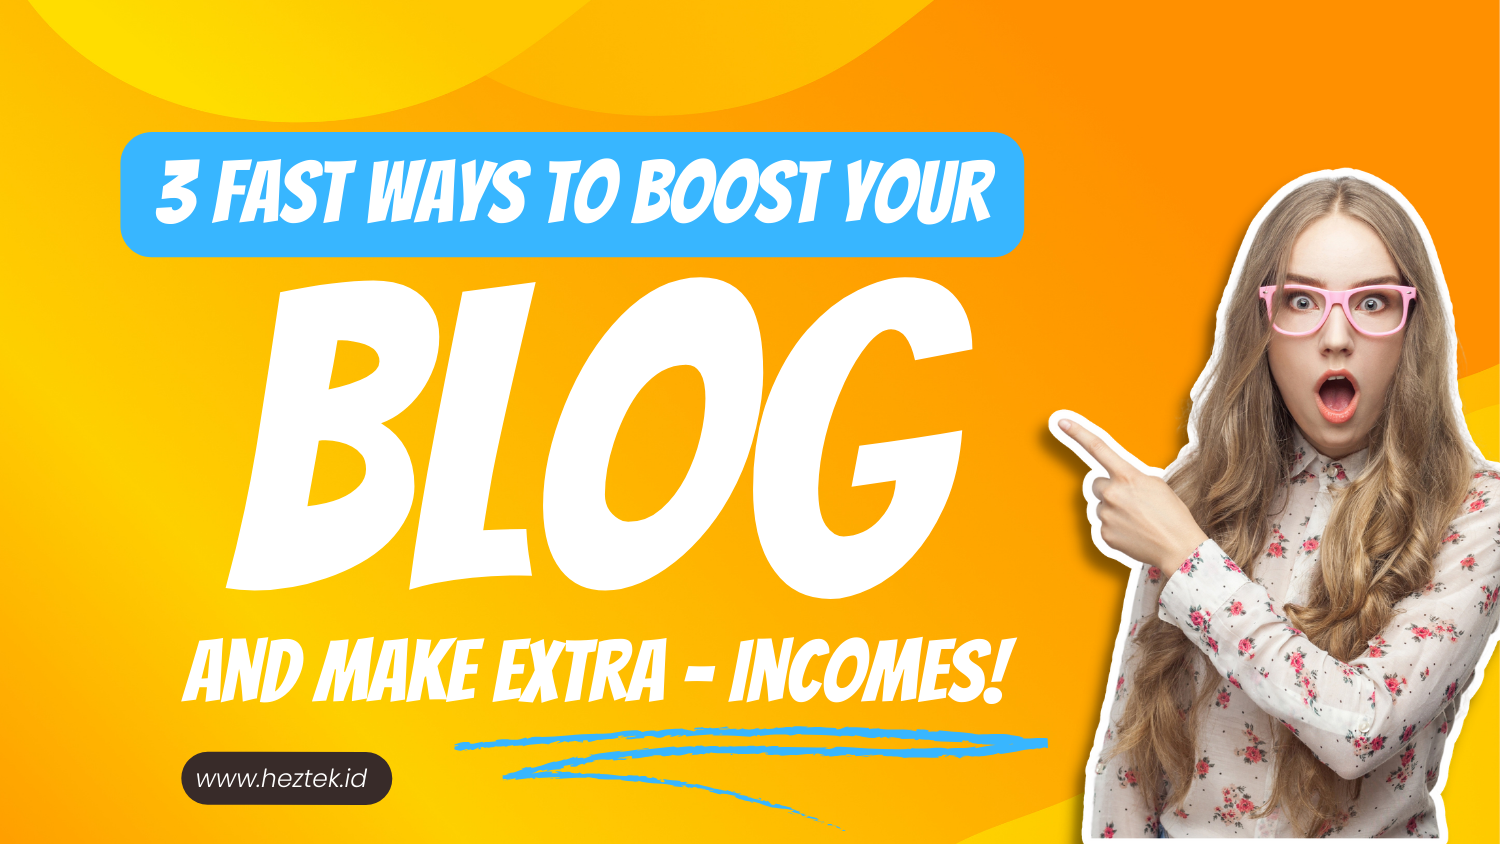 3 Fast Ways to Boost Your Blog and Make Extra Incomes